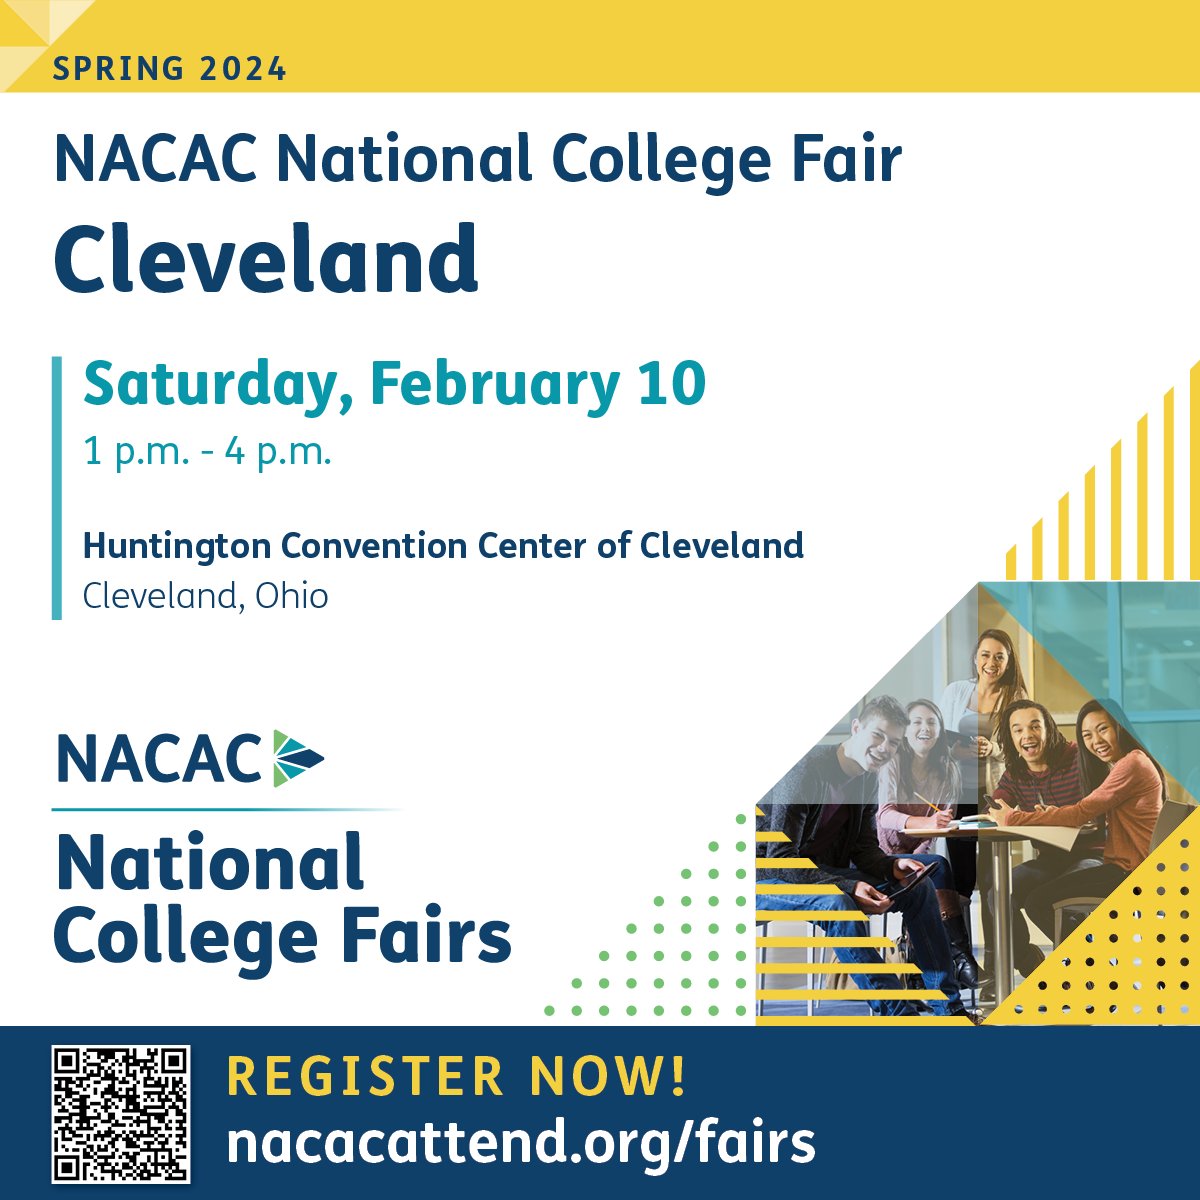 Don't miss this week's #collegefairs! 🔸 Wednesday, Feb 7 - Inland Empire National College Fair 🔸 Wednesday, Feb 7-8 - Pittsburgh National College Fair 🔸 Saturday, Feb 10 - Cleveland National College Fair Info and registration: nacacattend.org/fairs #NACAC #collegefair